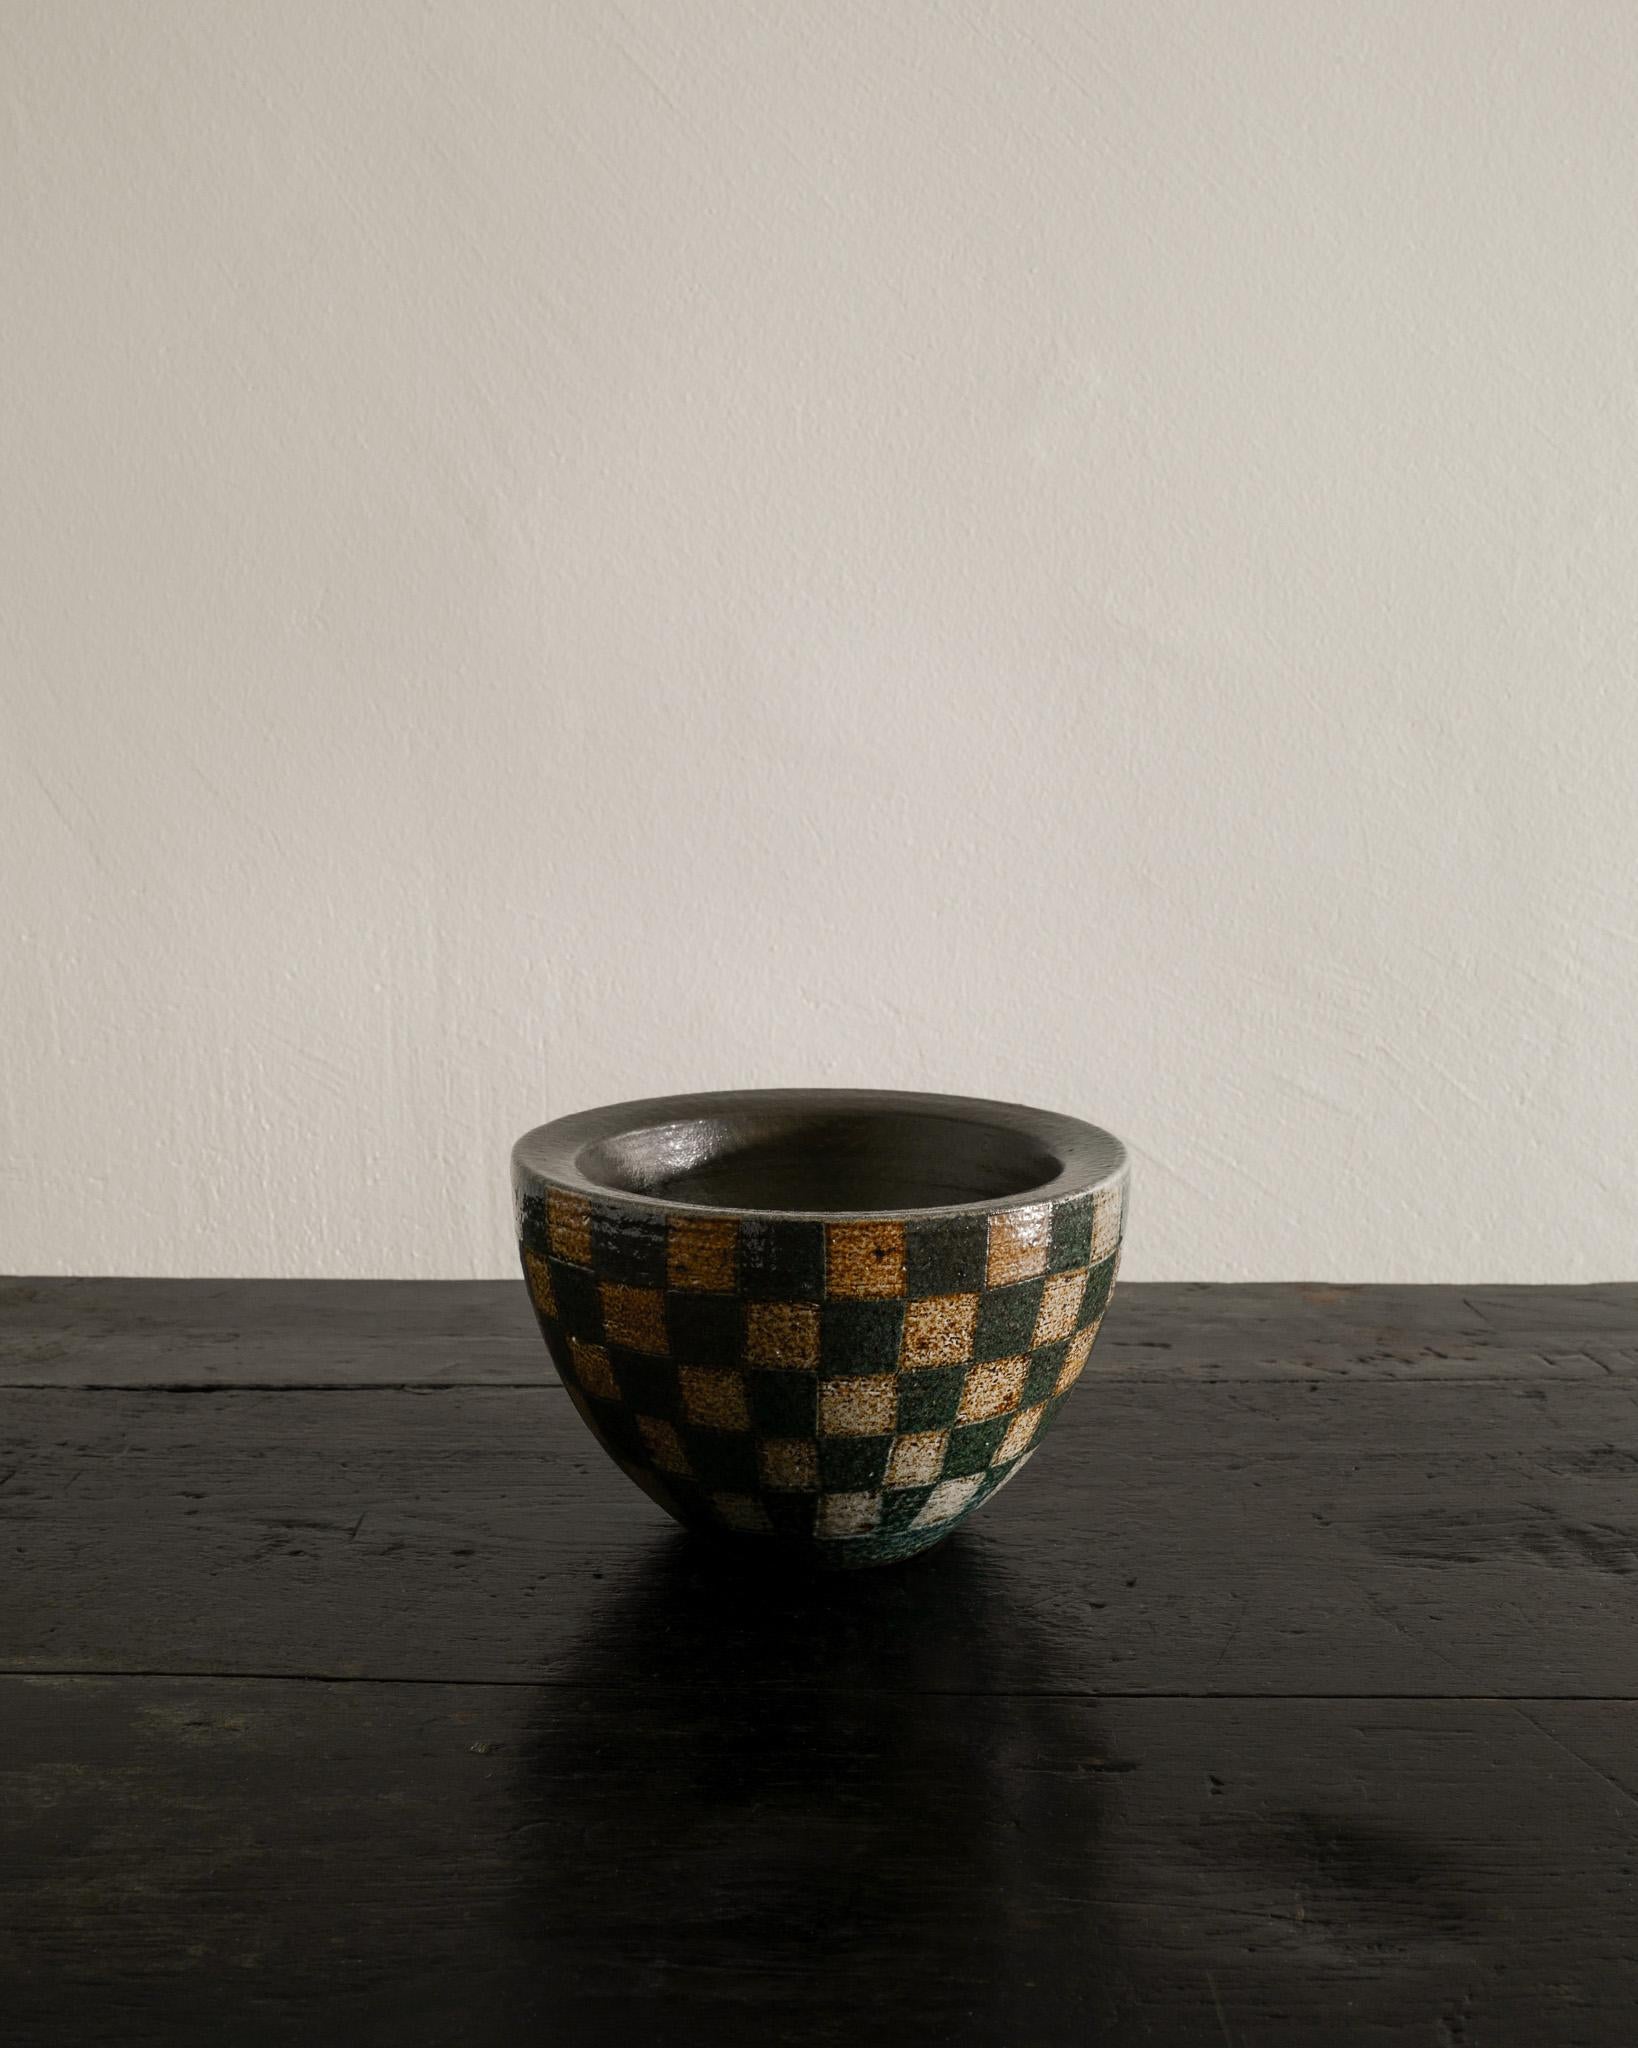 Scandinavian Modern Checkered Ceramic Stoneware Bowl by Thord Karlsson Produced in Sweden, 1990s